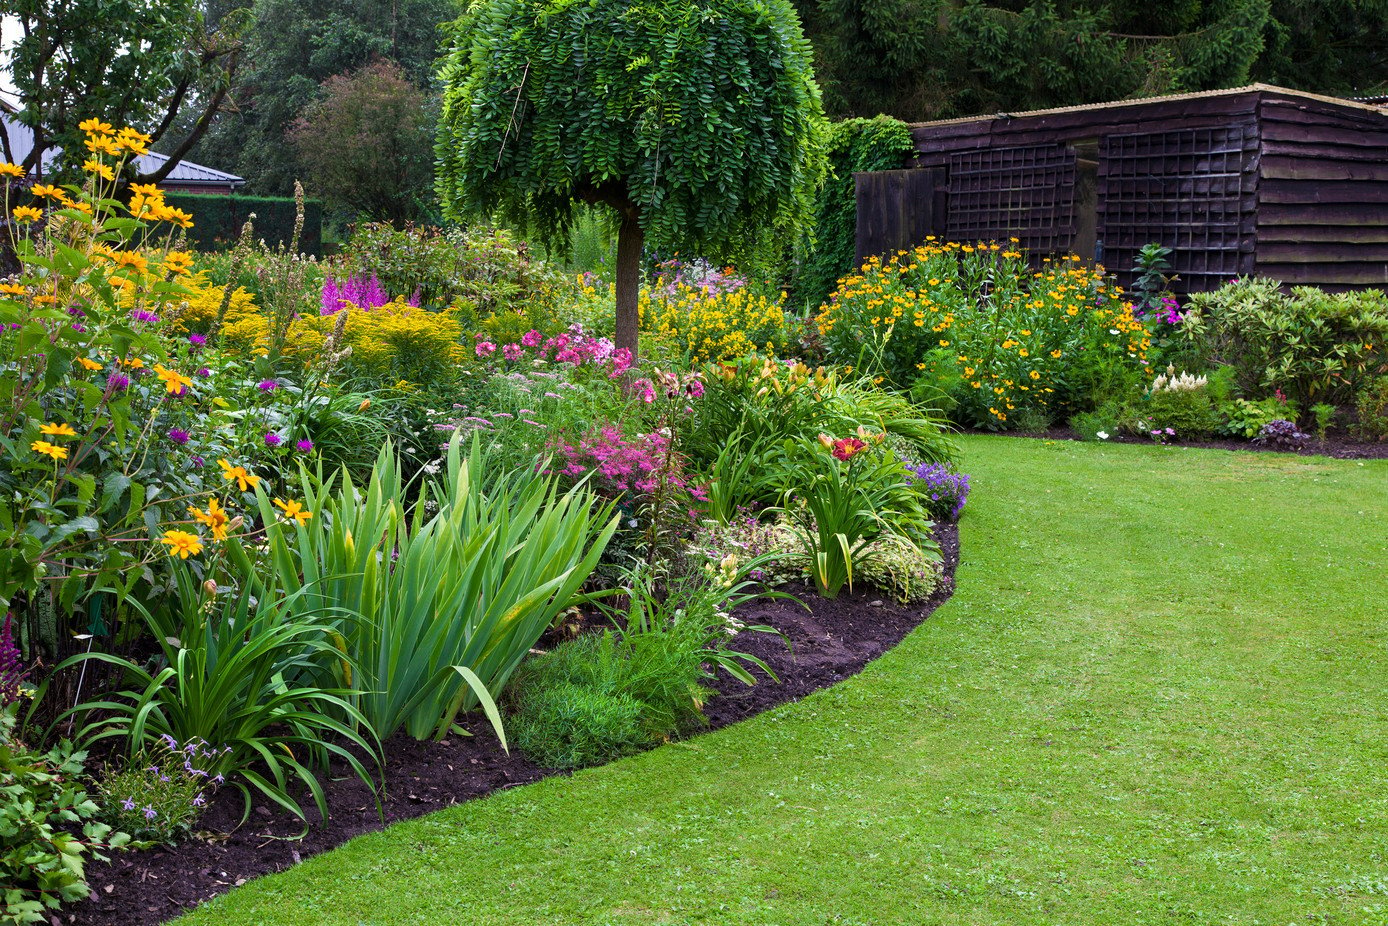 Creative Ideas To Landscape A Slope, Landscaping A Slope On Budget